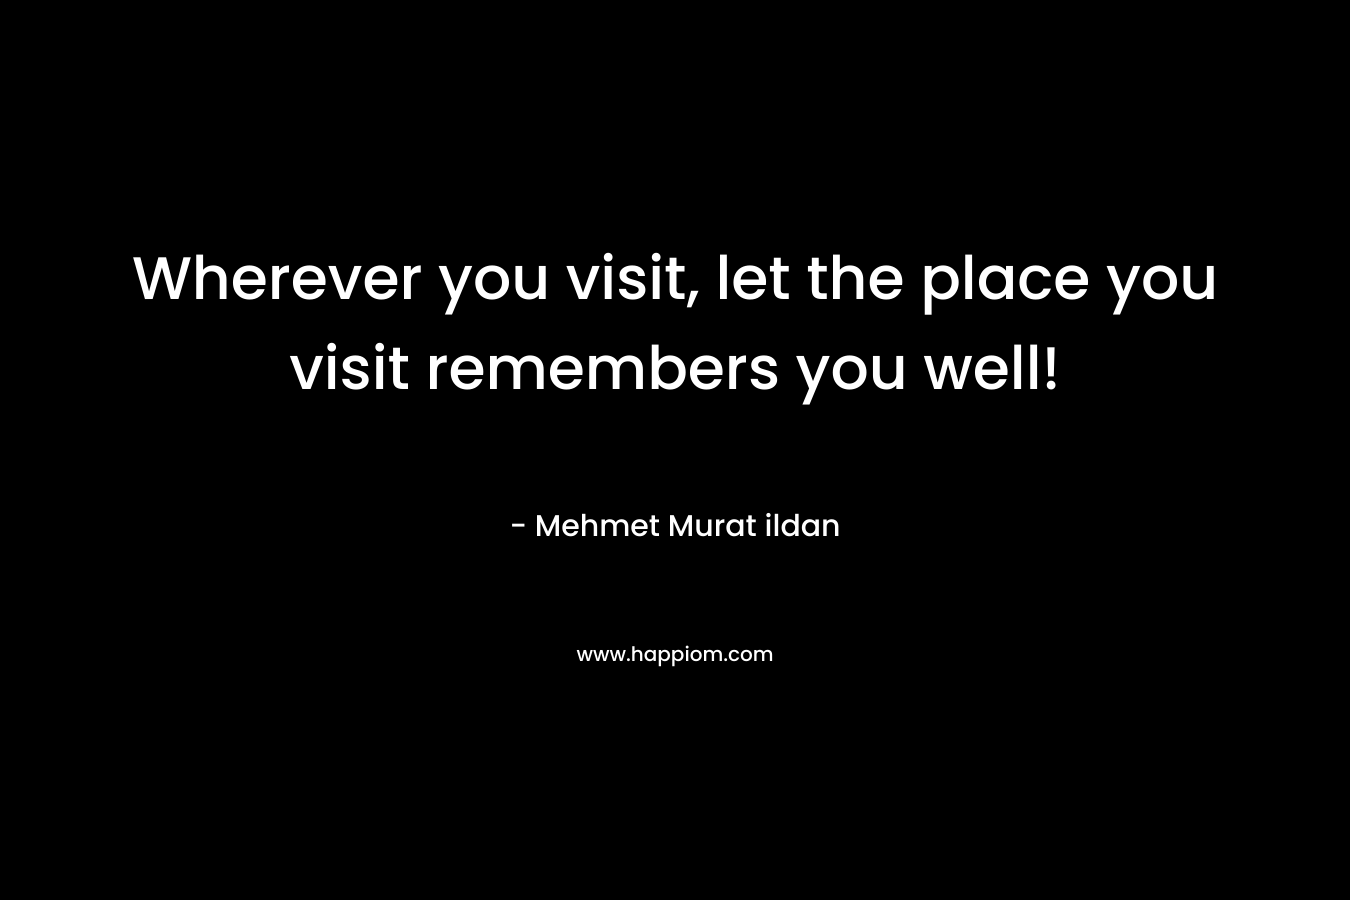 Wherever you visit, let the place you visit remembers you well!